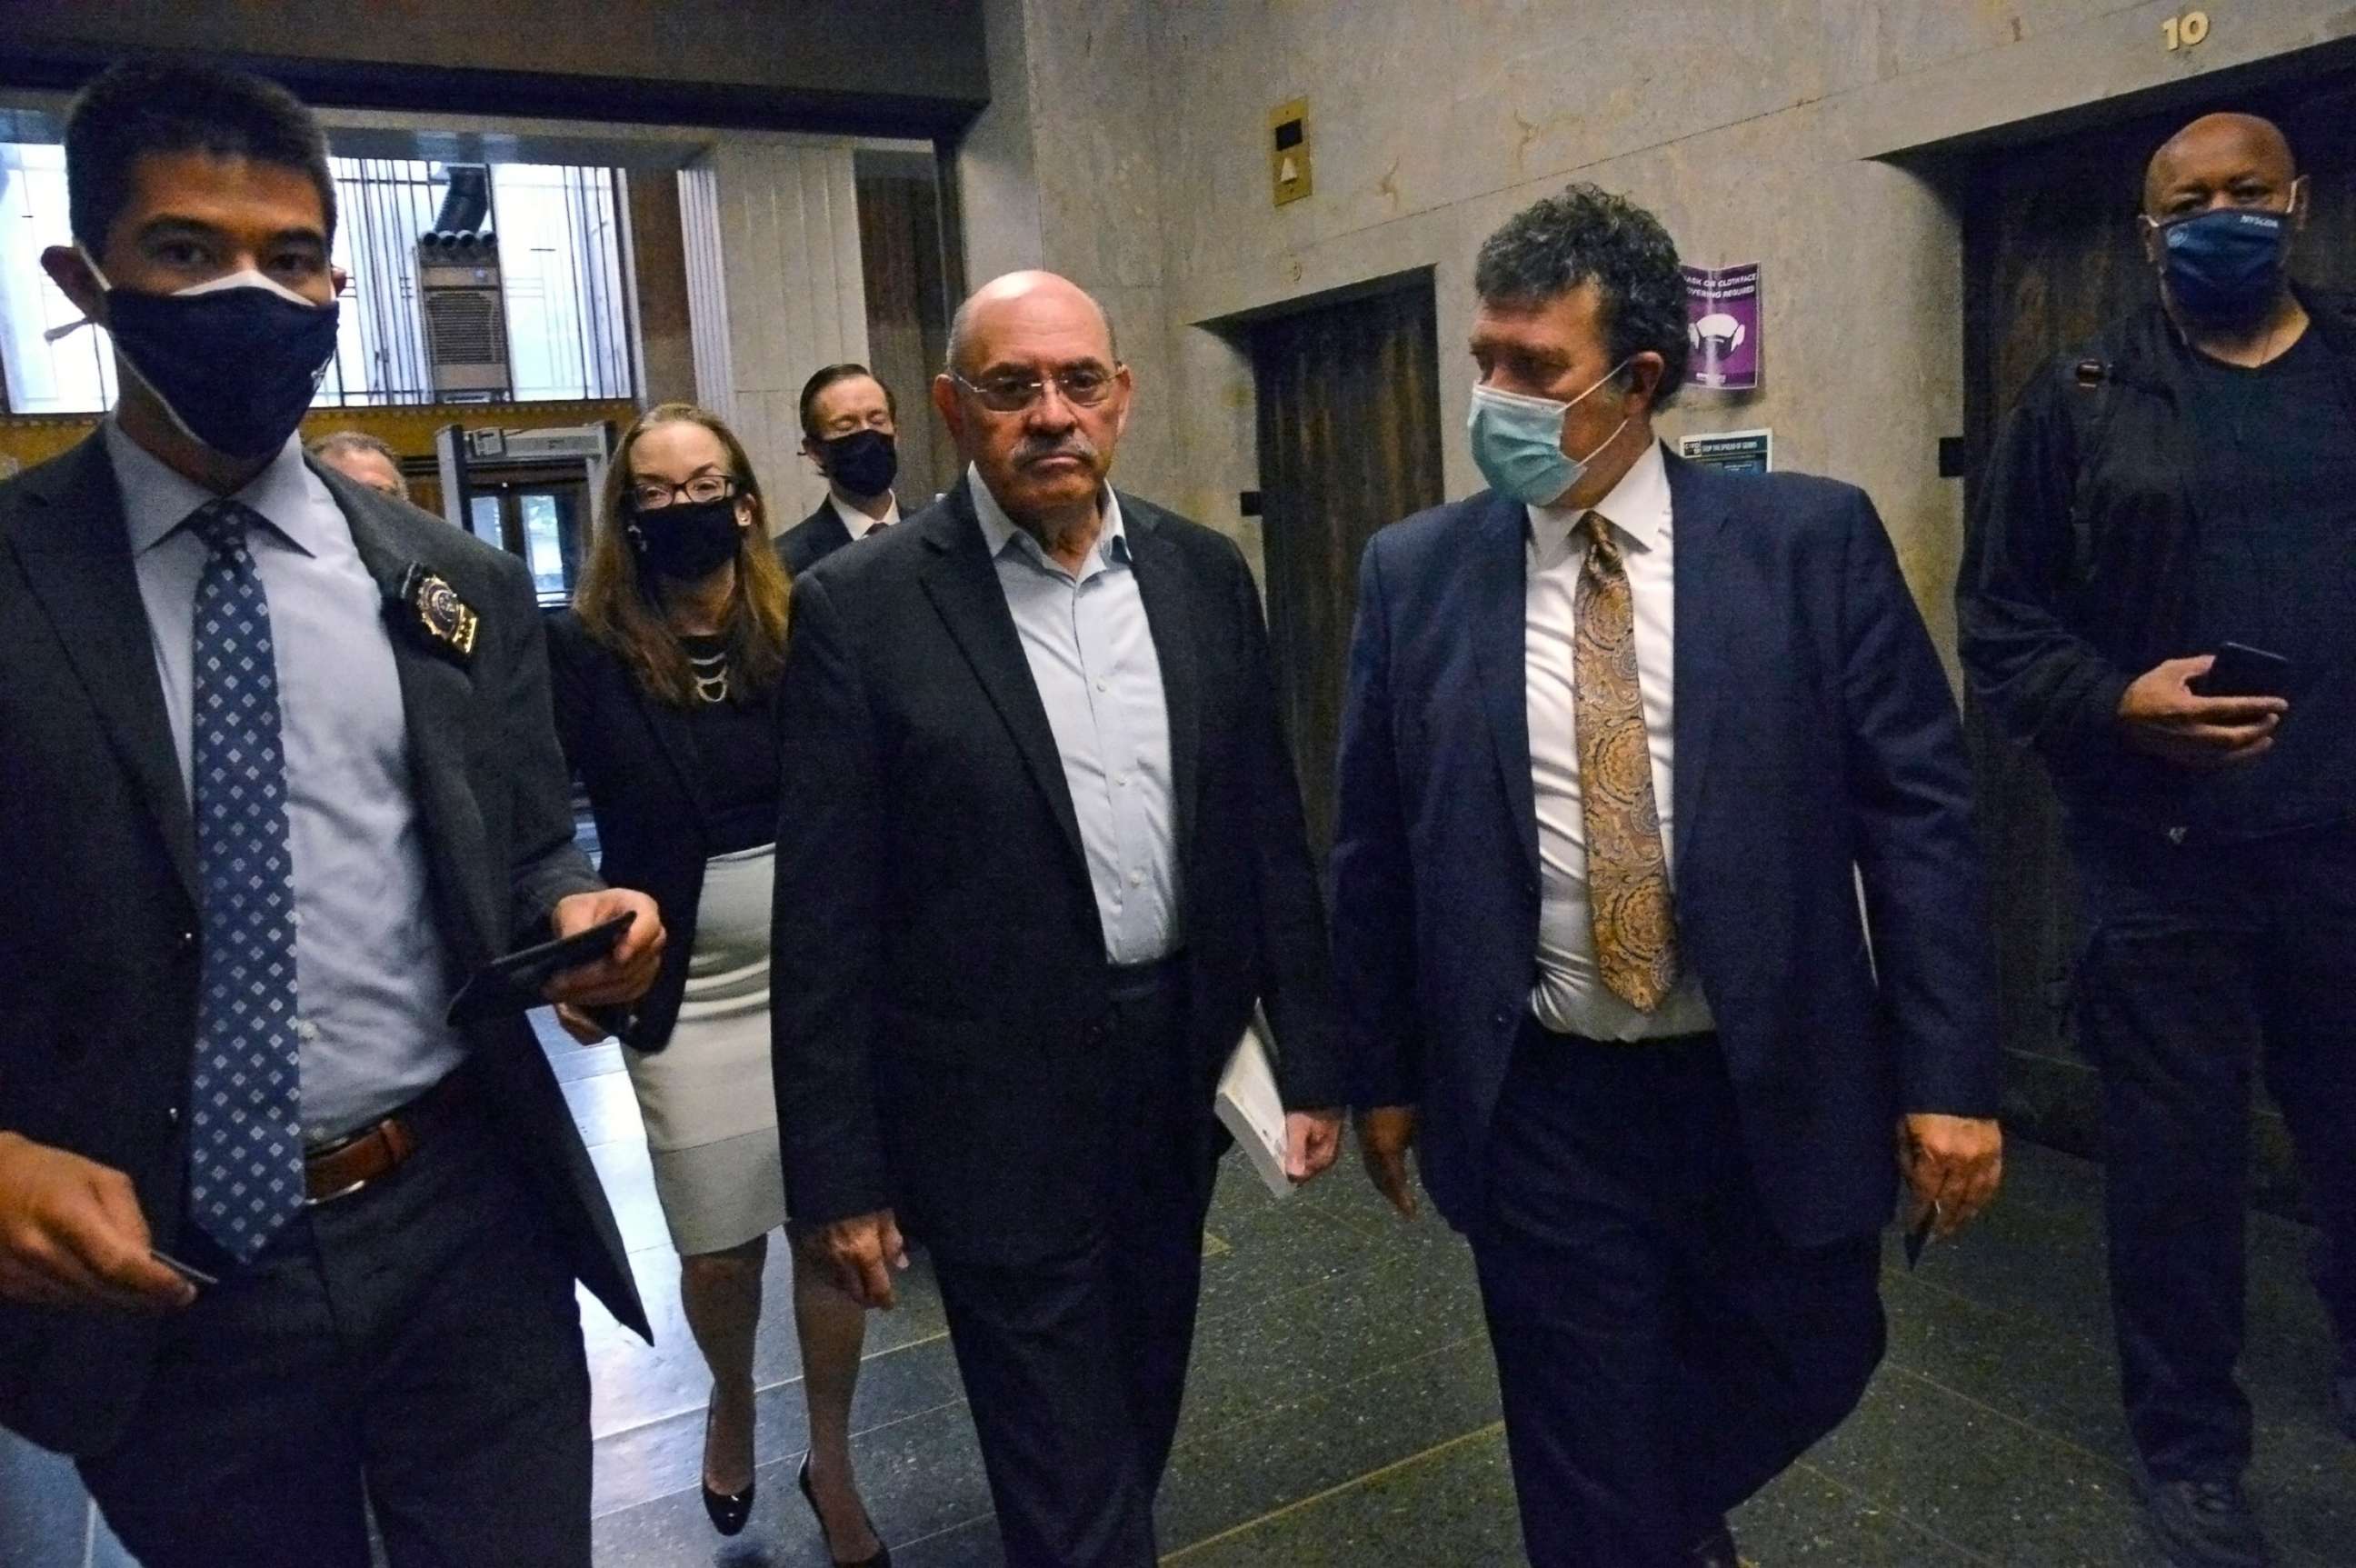 PHOTO: Allen Weisselberg, second from left, Donald Trump's long-serving chief financial officer, surrenders on July 1, 2021, at the lower Manhattan building that houses the criminal courts and the district attorney's office. 